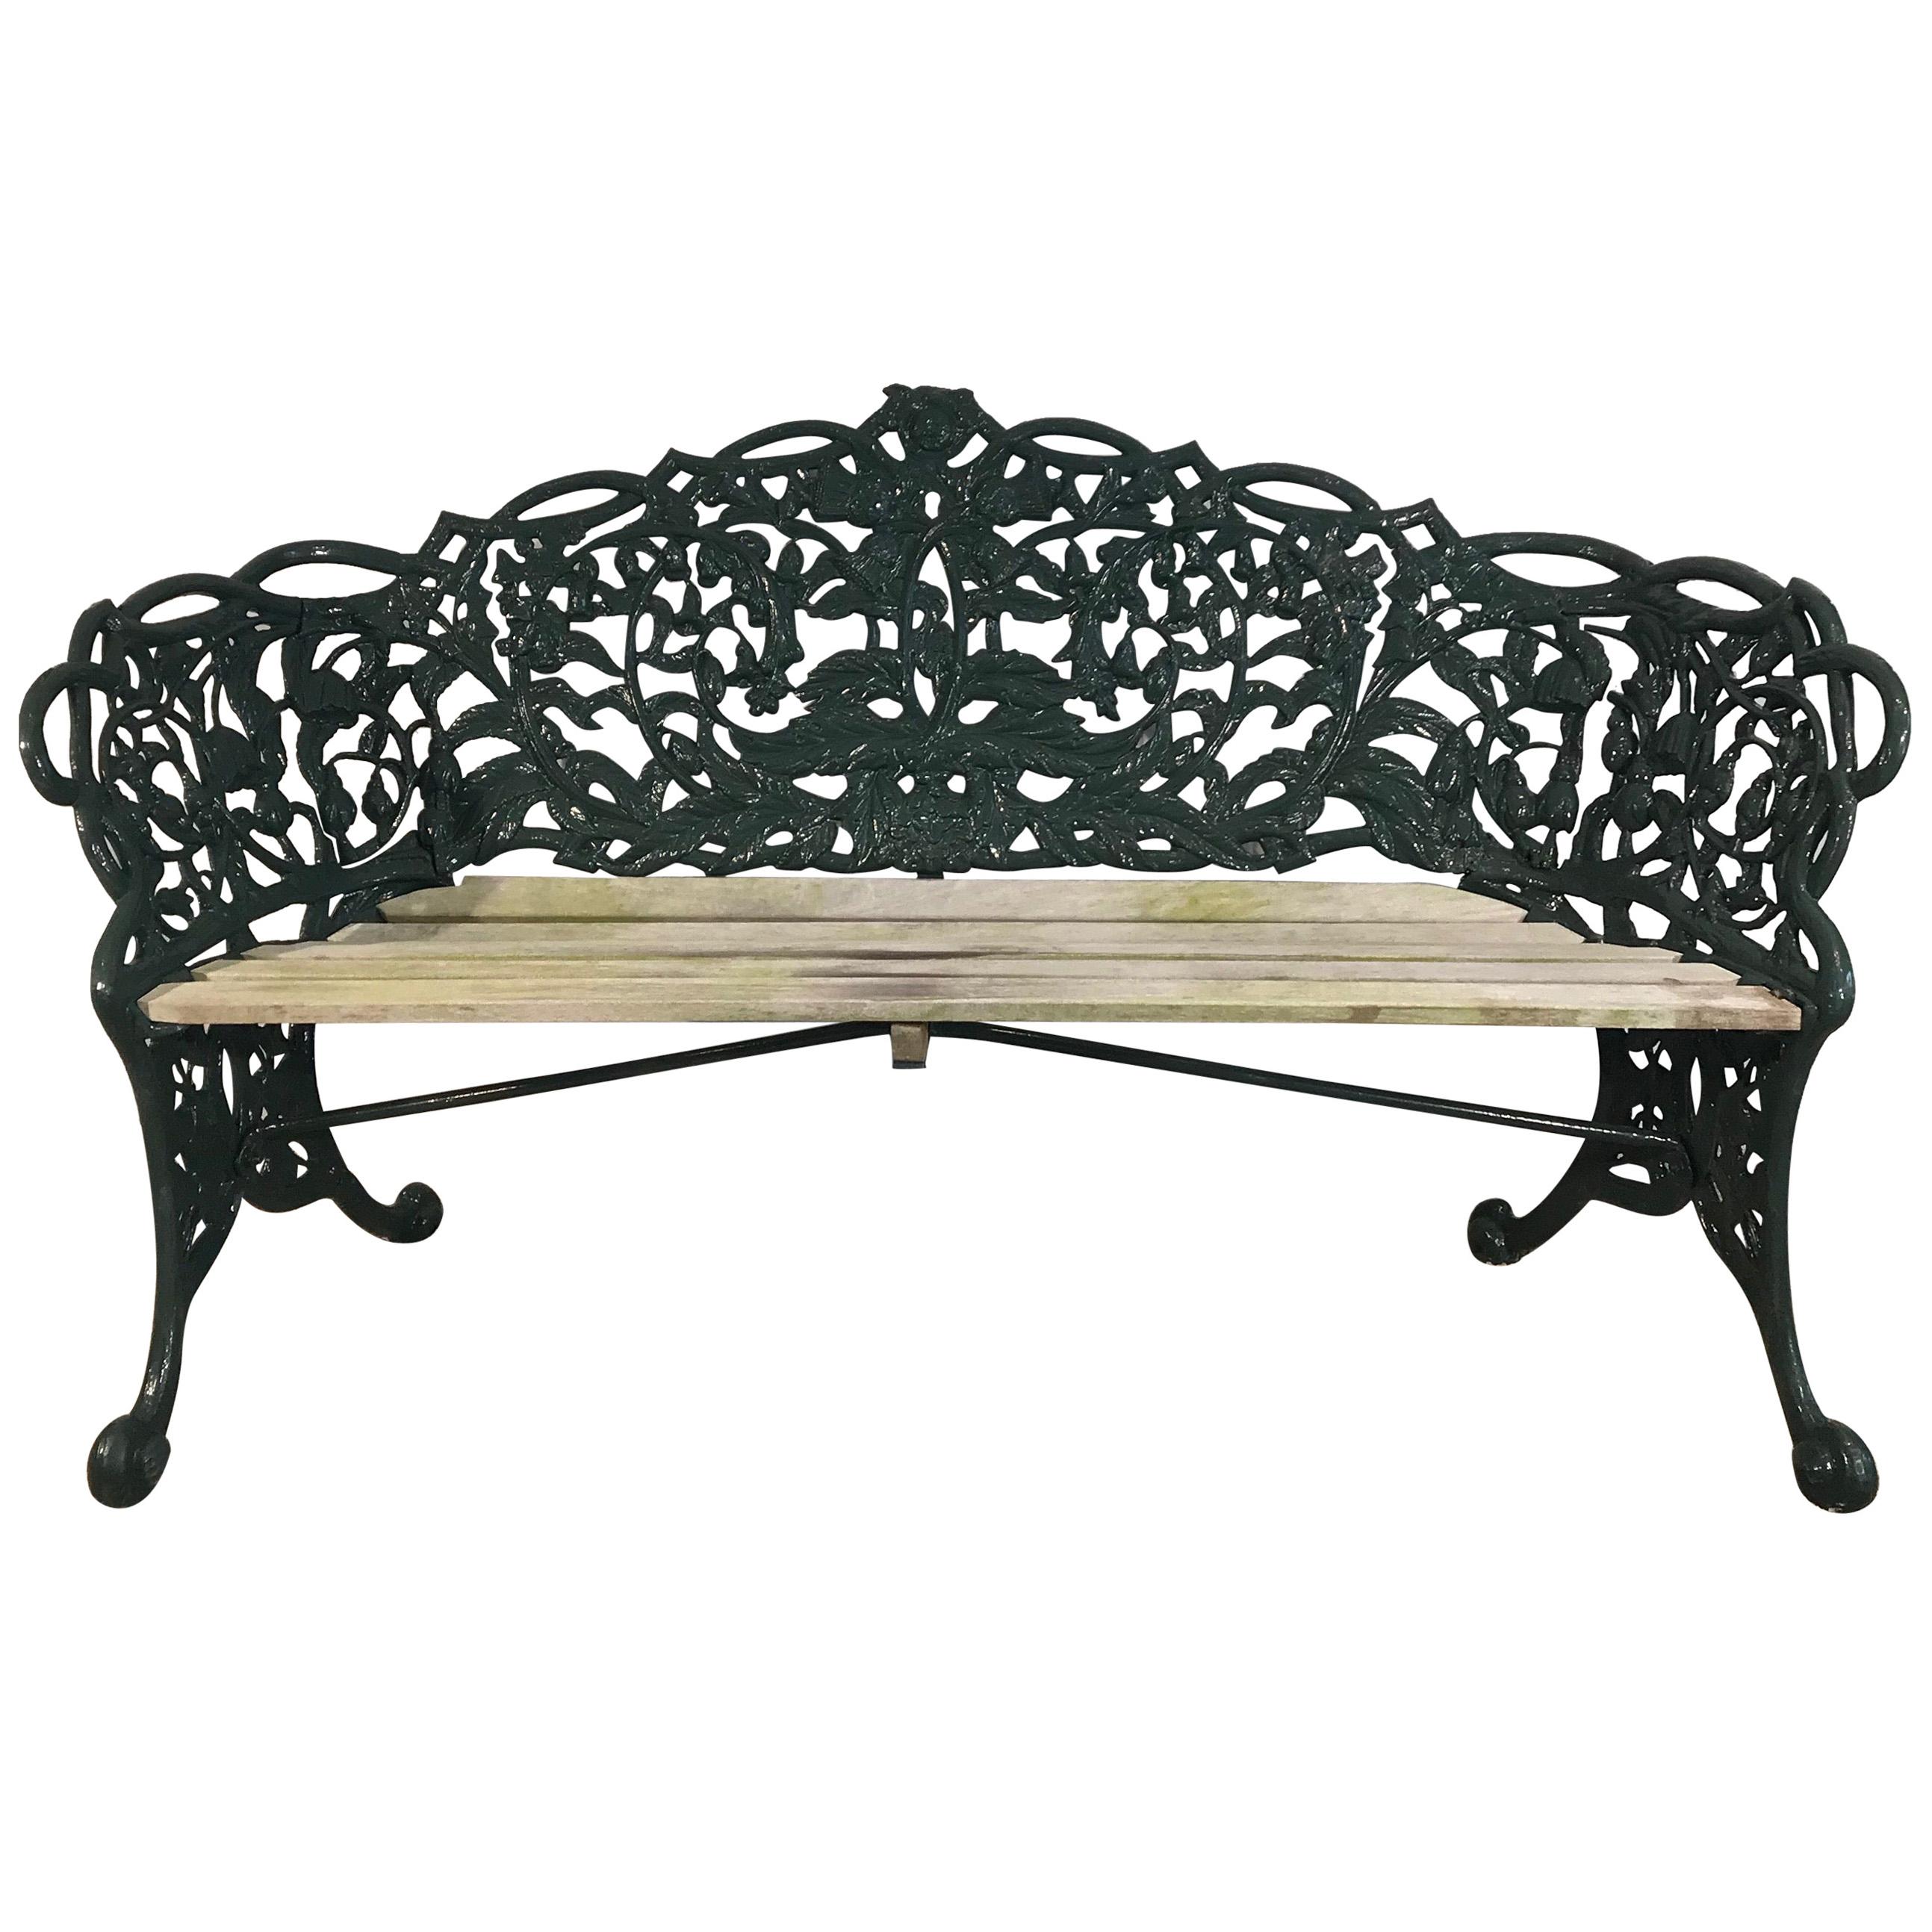 Rose and Thistle Cast Iron Bench by T. Perry and Sons, Glasgow, 1858